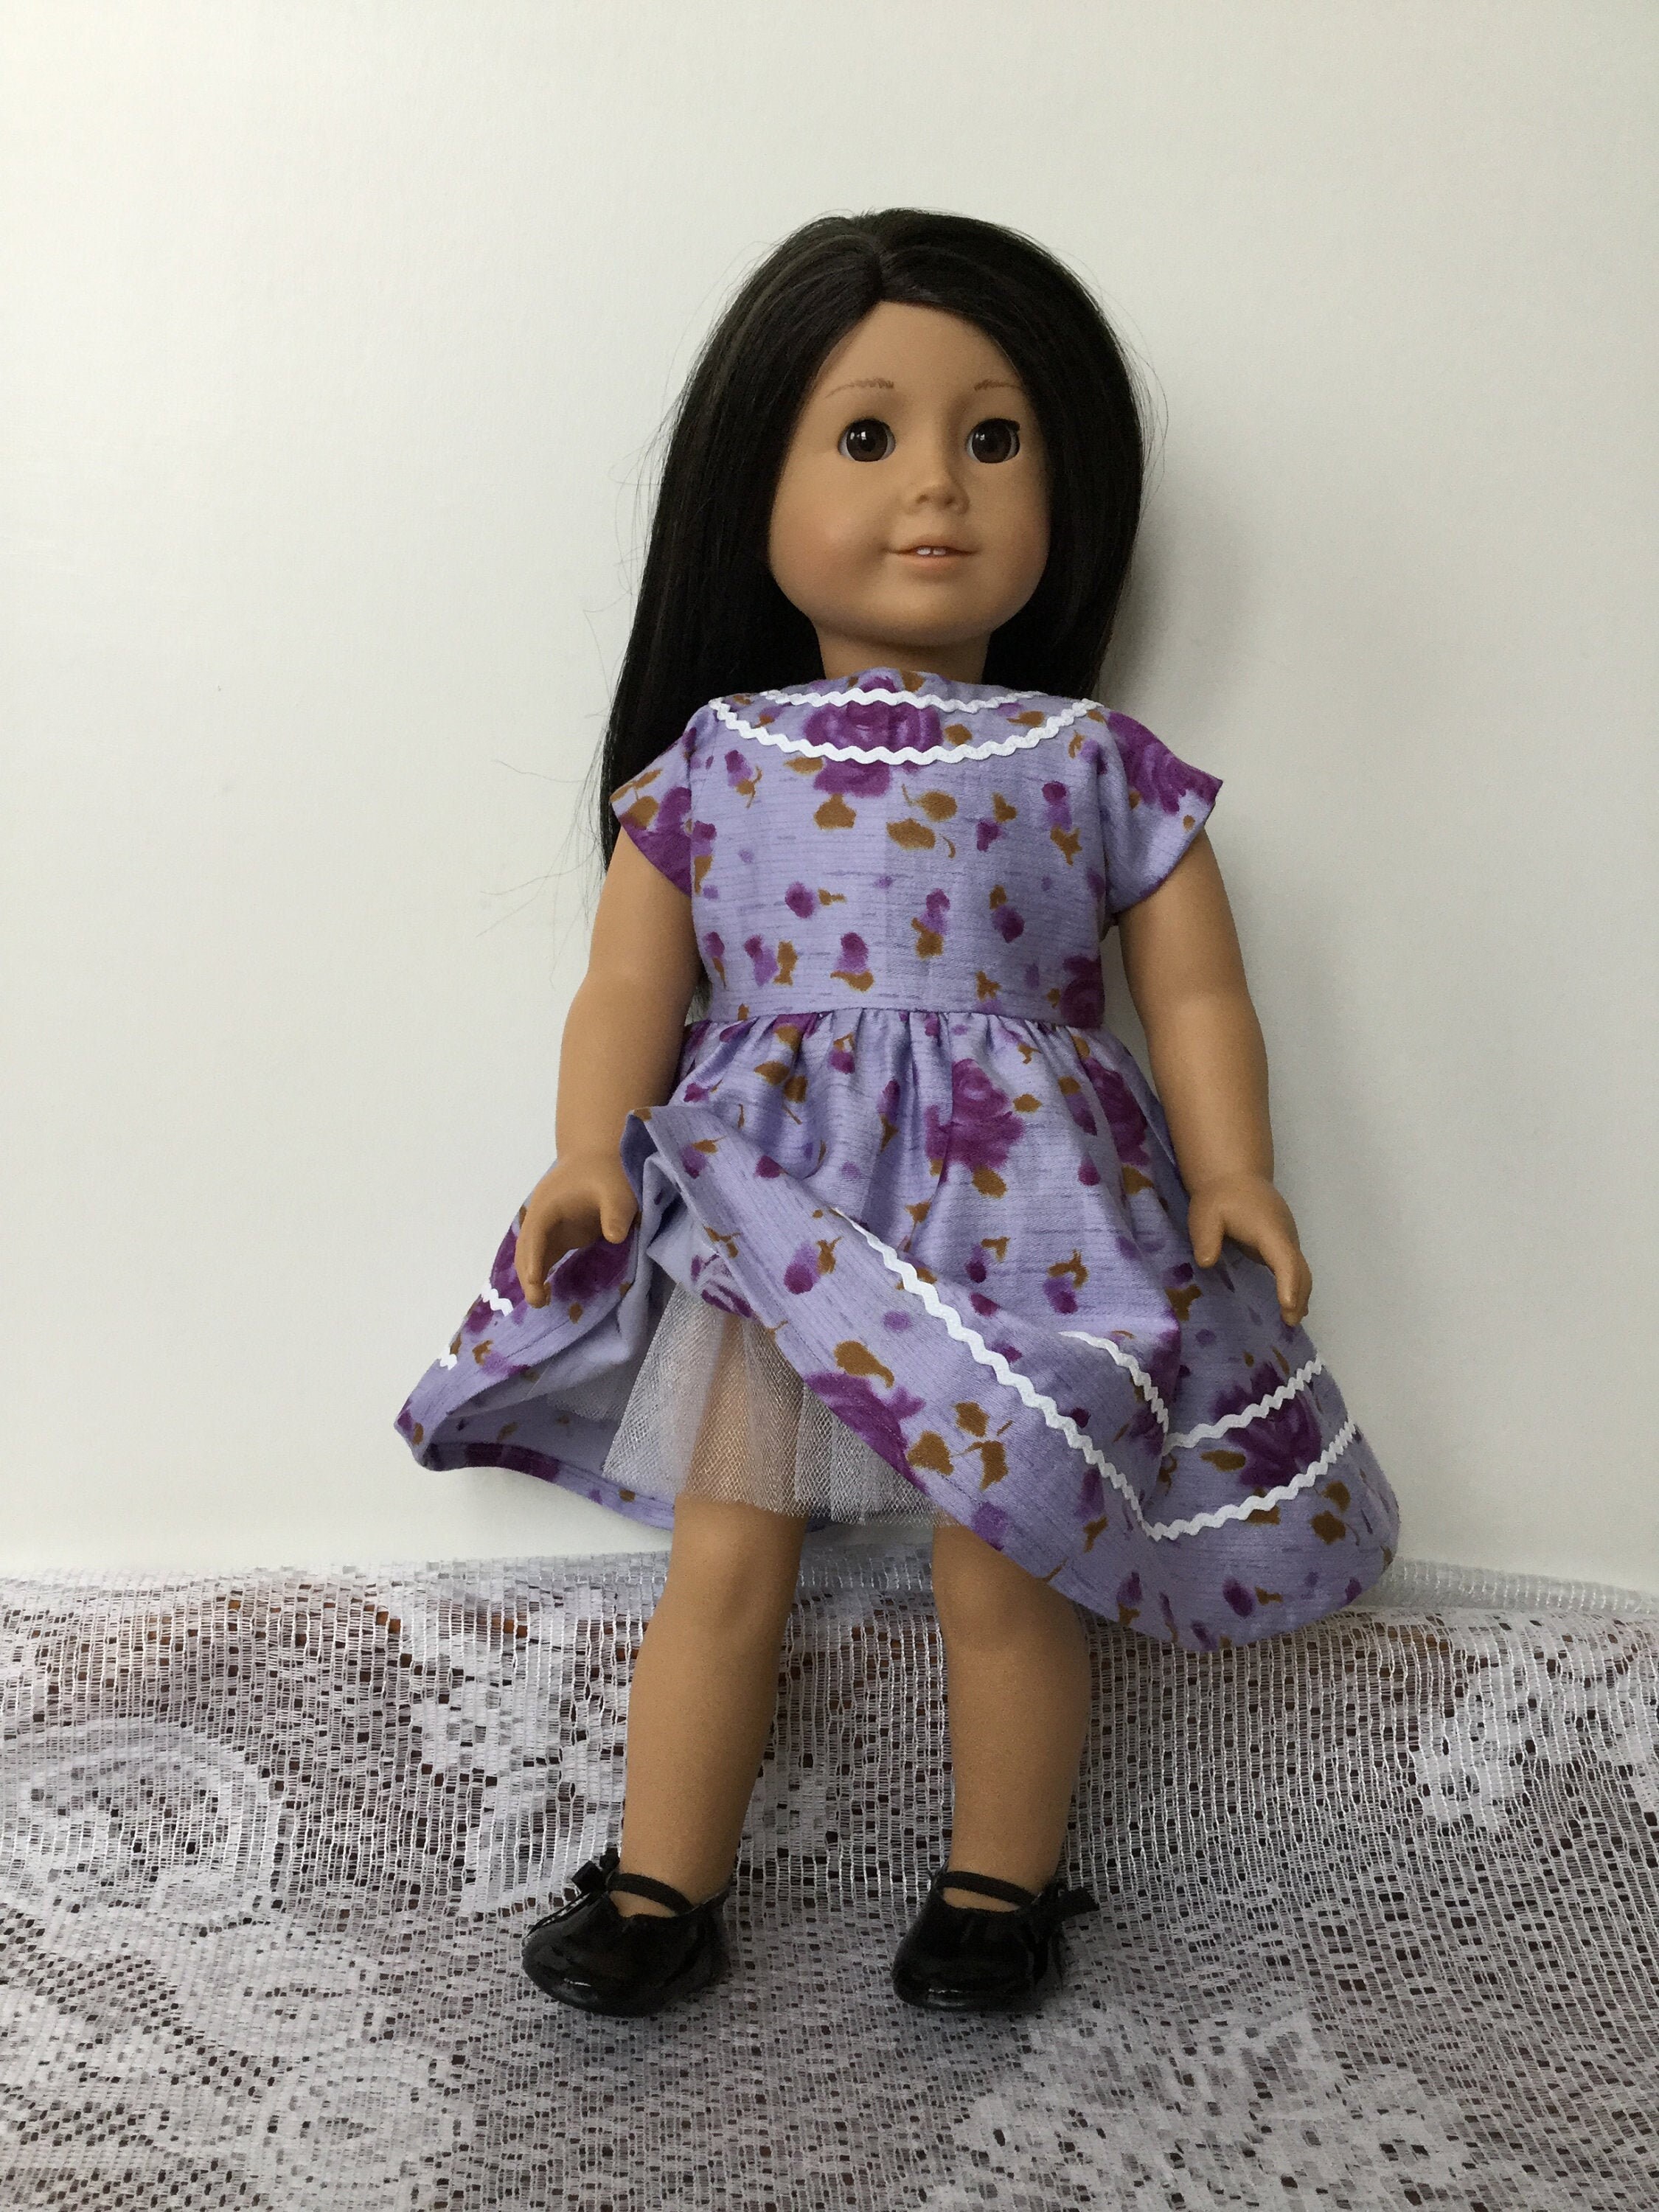 homemade 18 inch doll clothes that will fit American Girl Doll or My Life Doll 